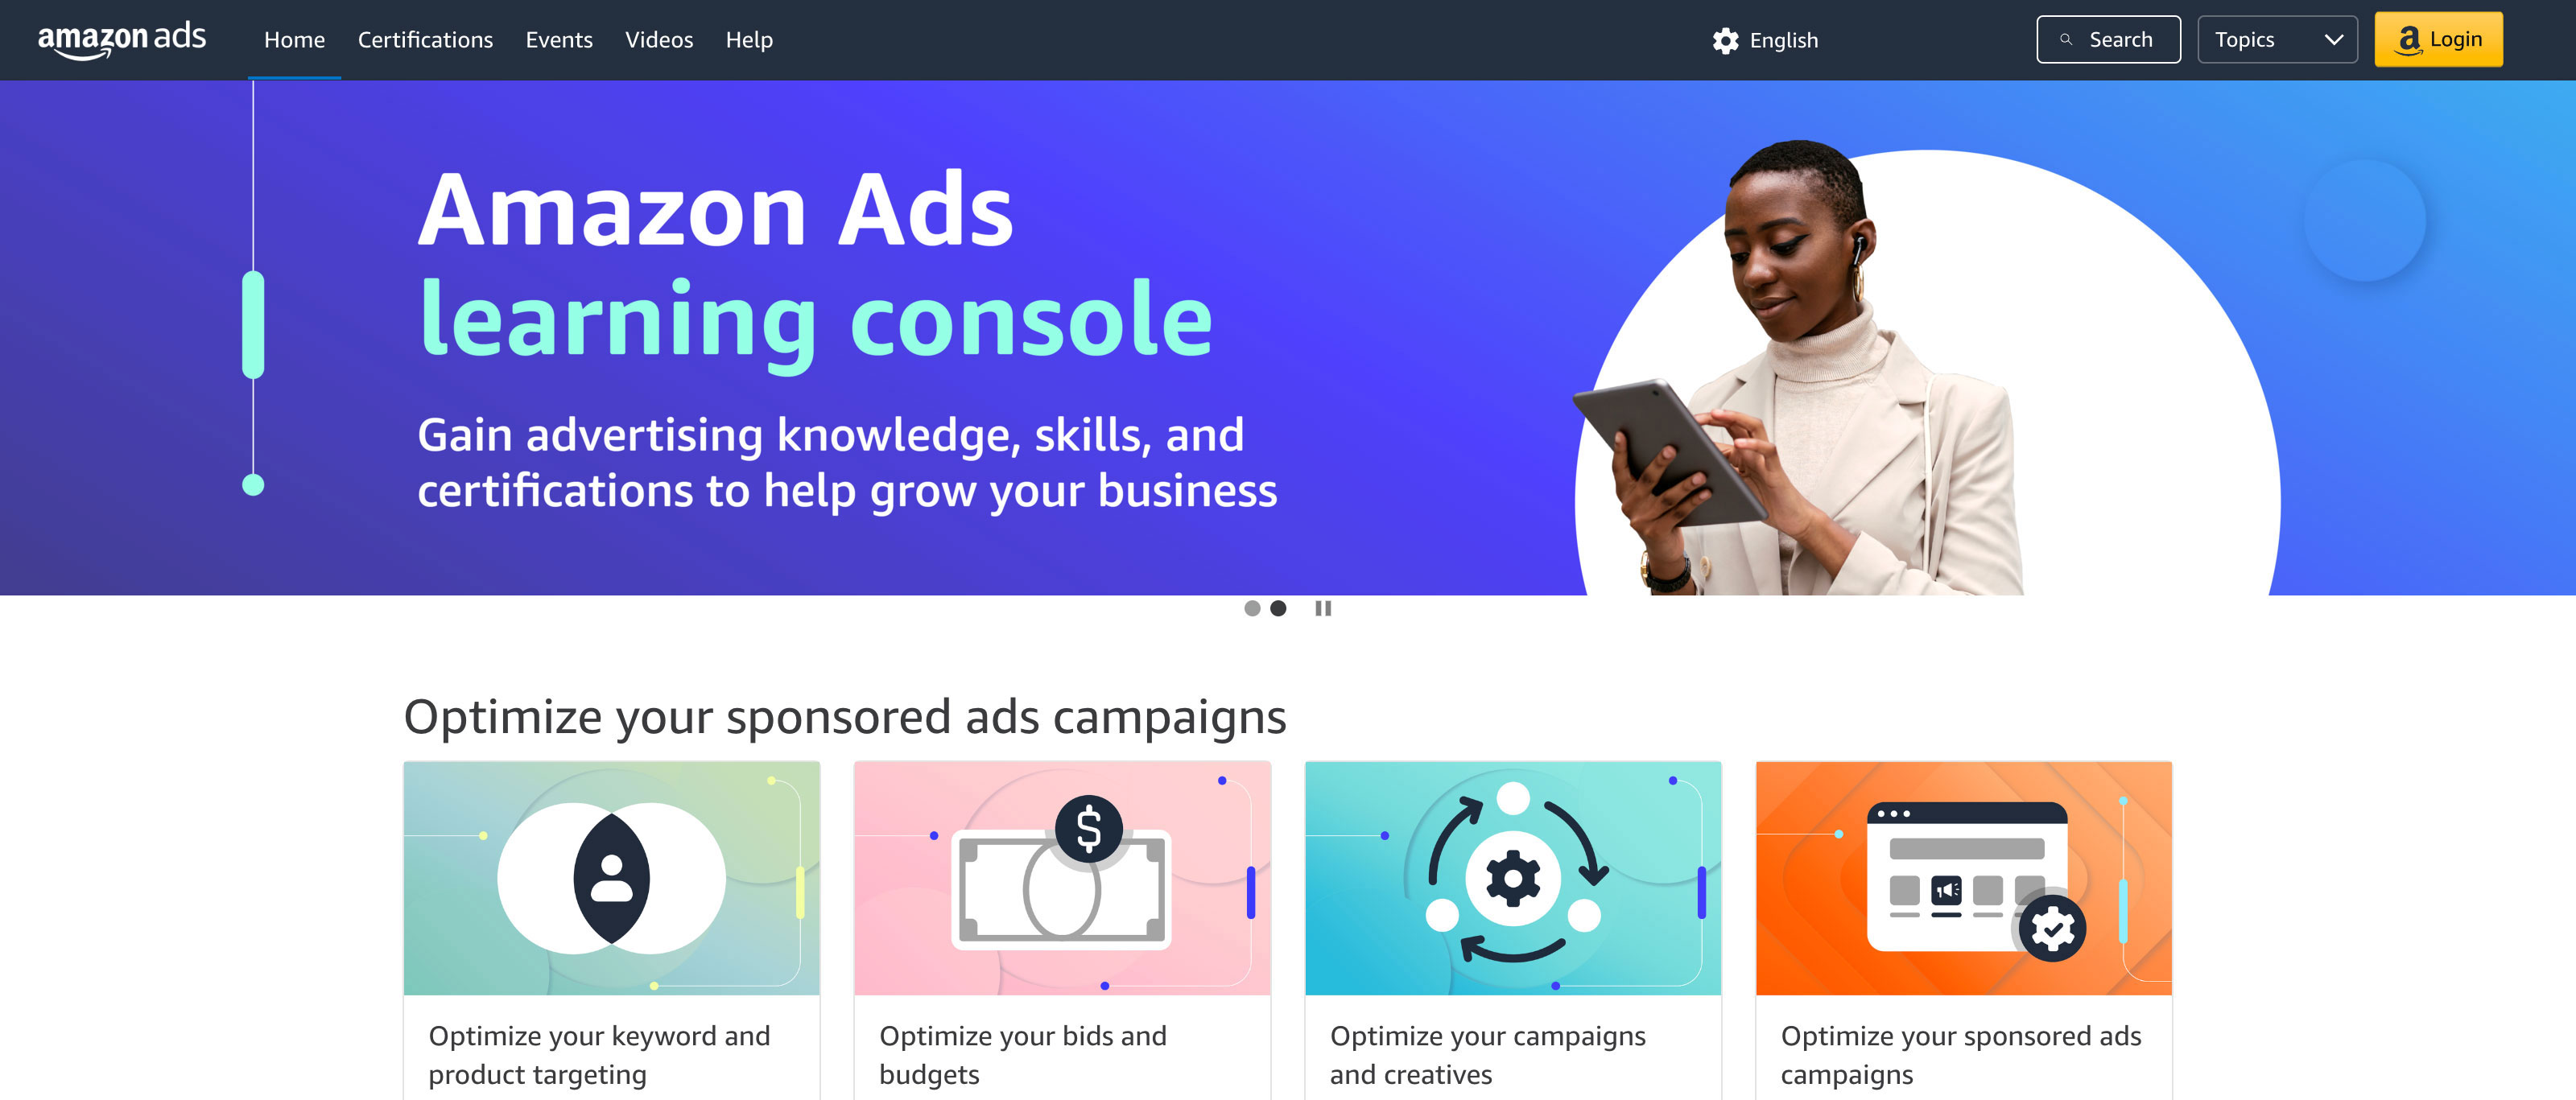 Homepage UI example of Amazon Ads Learning Console on the Intellum Platform